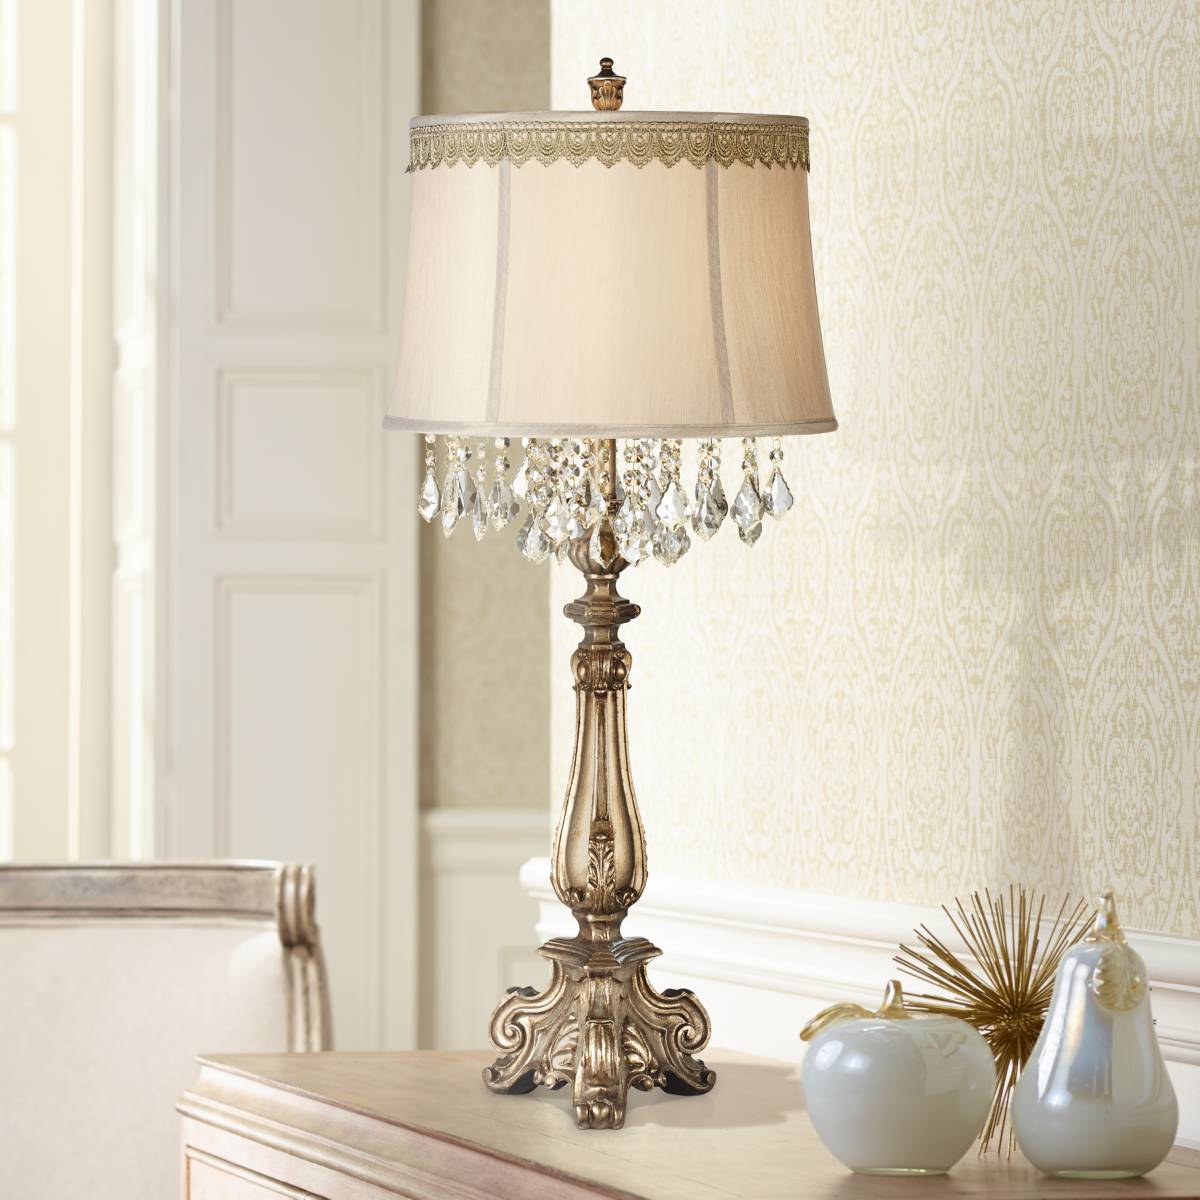 Tall Table Lamps - Large Designs, 36 Inches High and Up | Lamps Plus